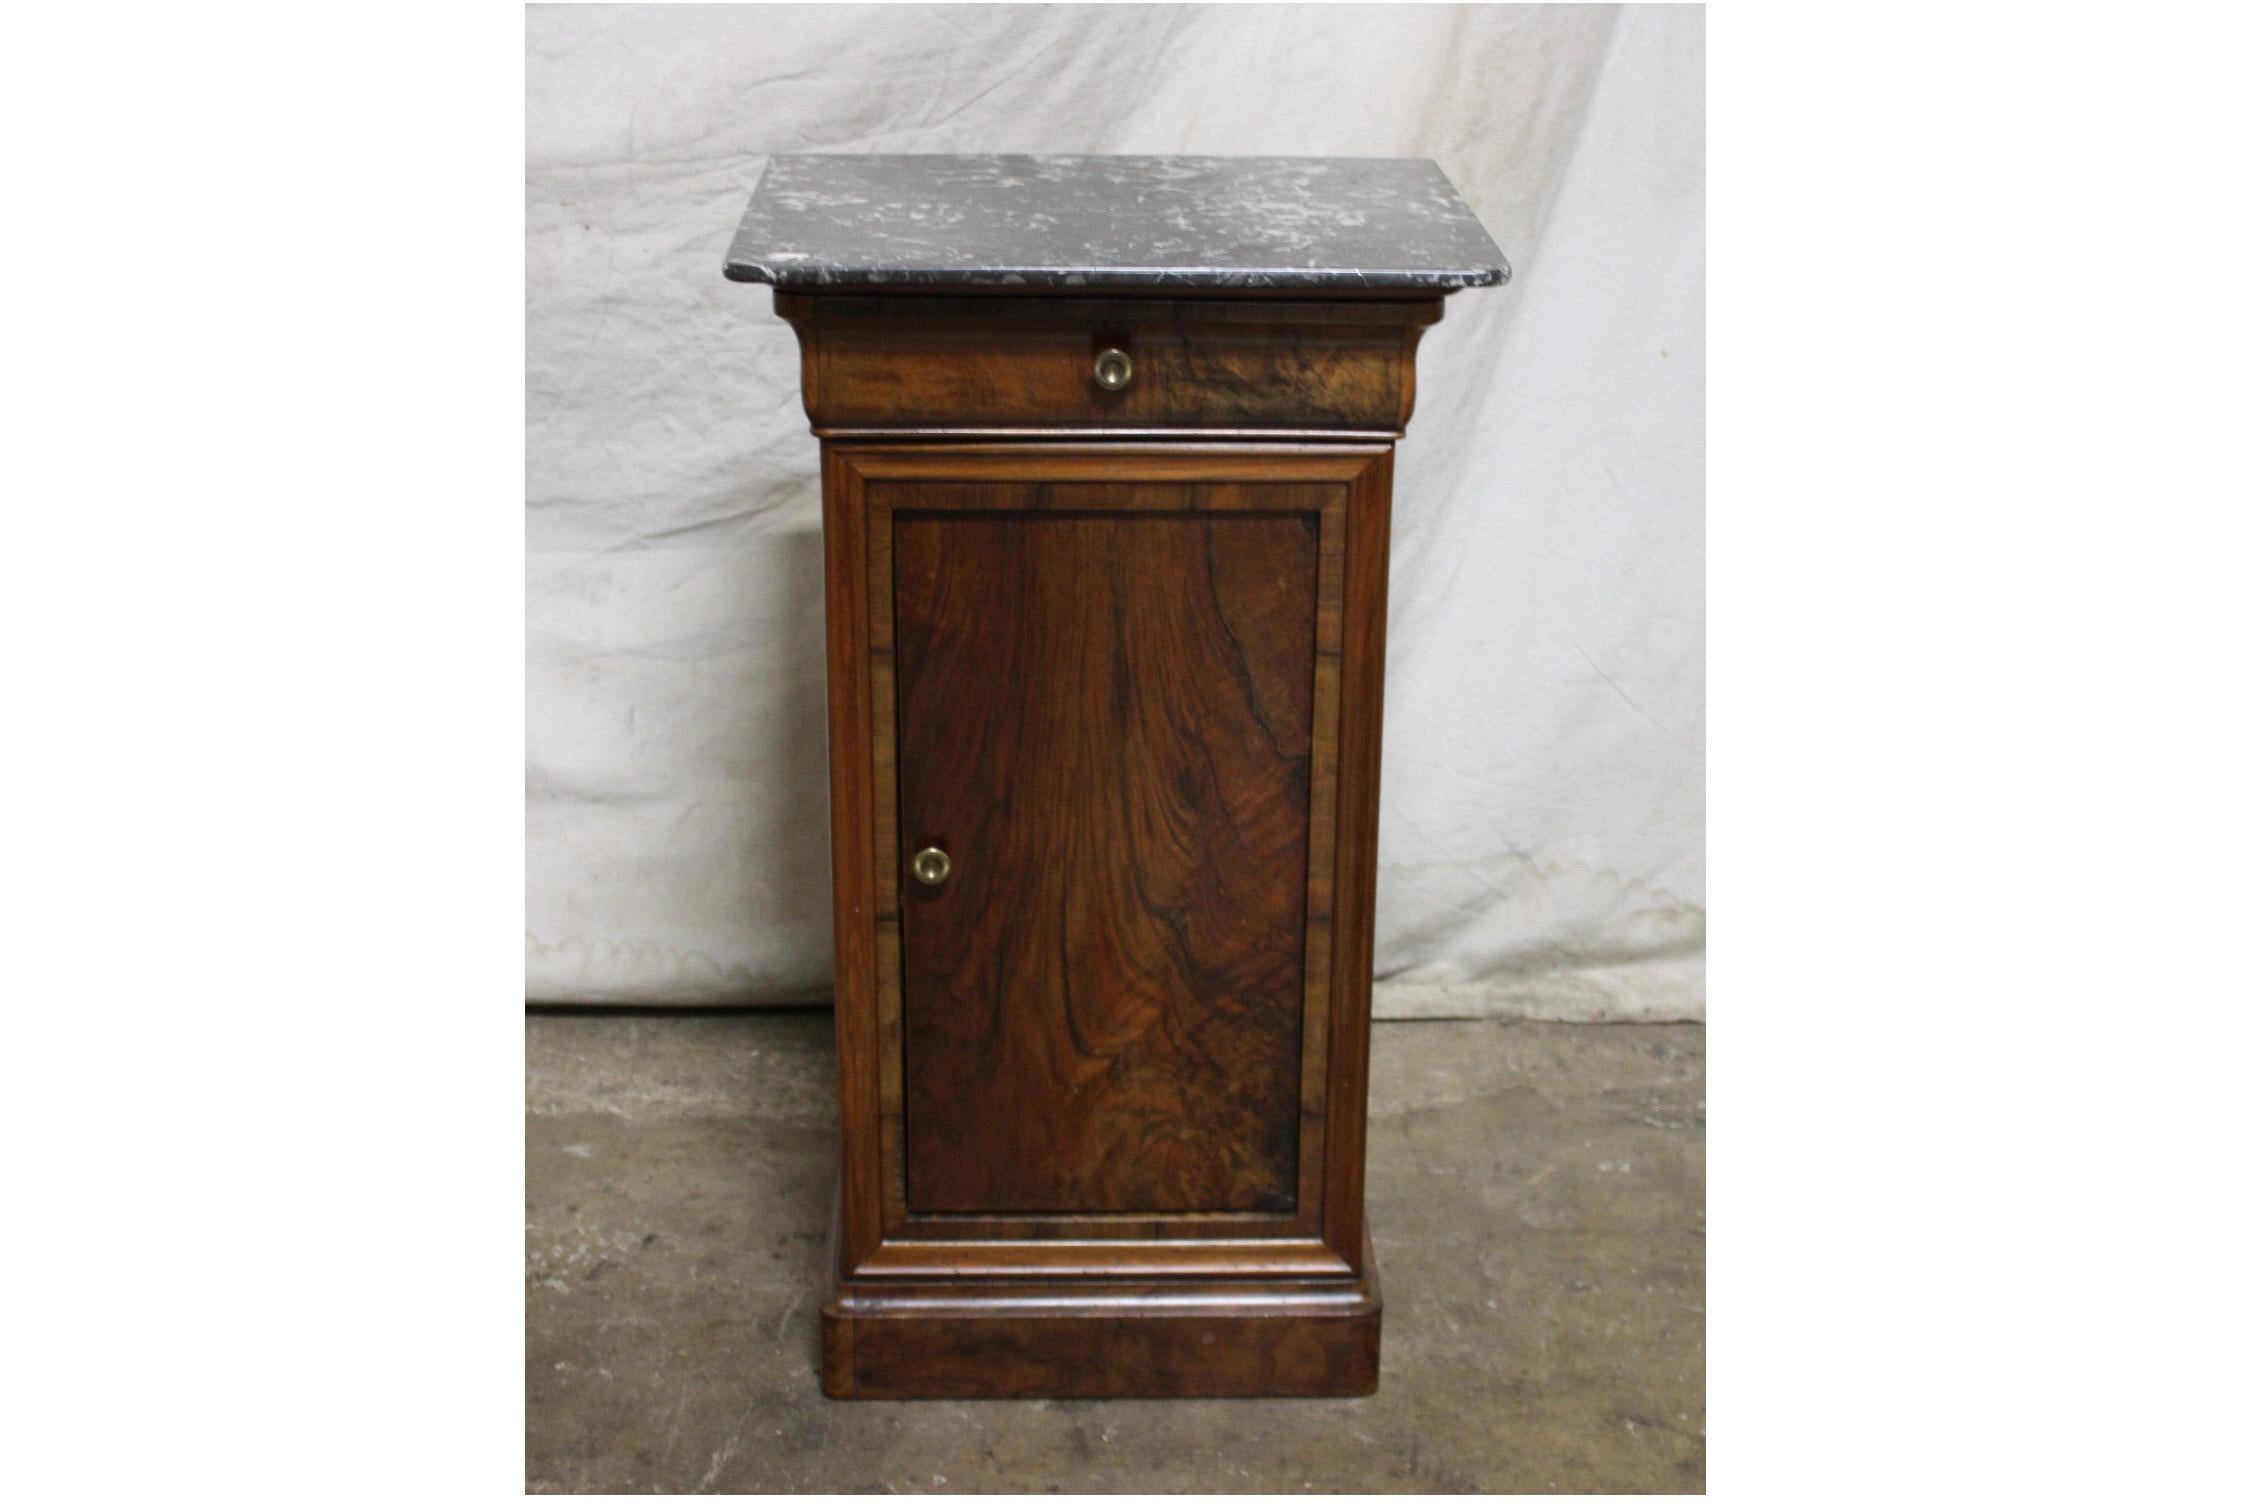 Very charming piece by its proportion and a very nice flamed walnut. It wears a Ste-Anne marble top.